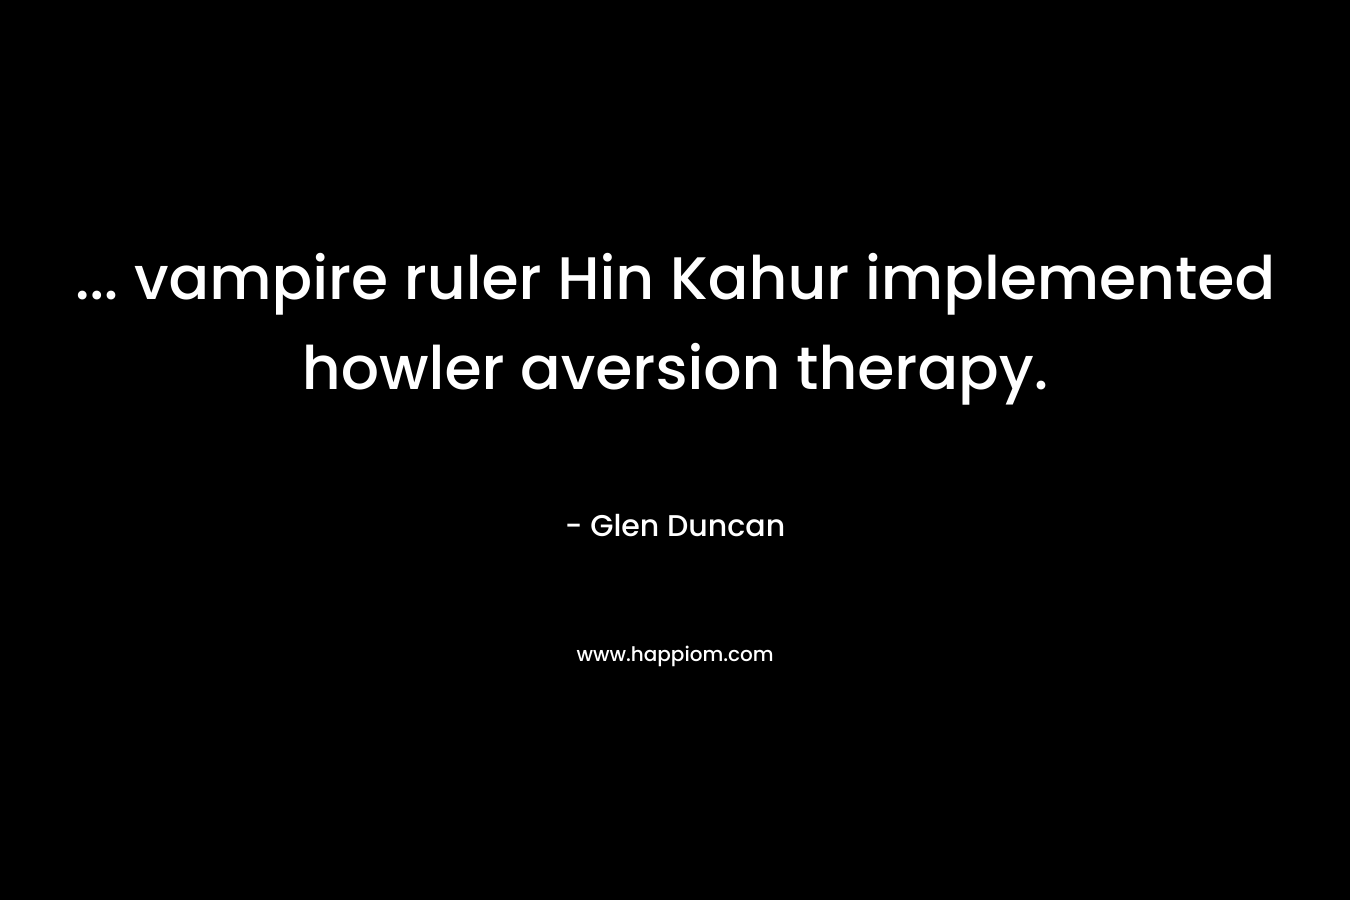 ... vampire ruler Hin Kahur implemented howler aversion therapy.